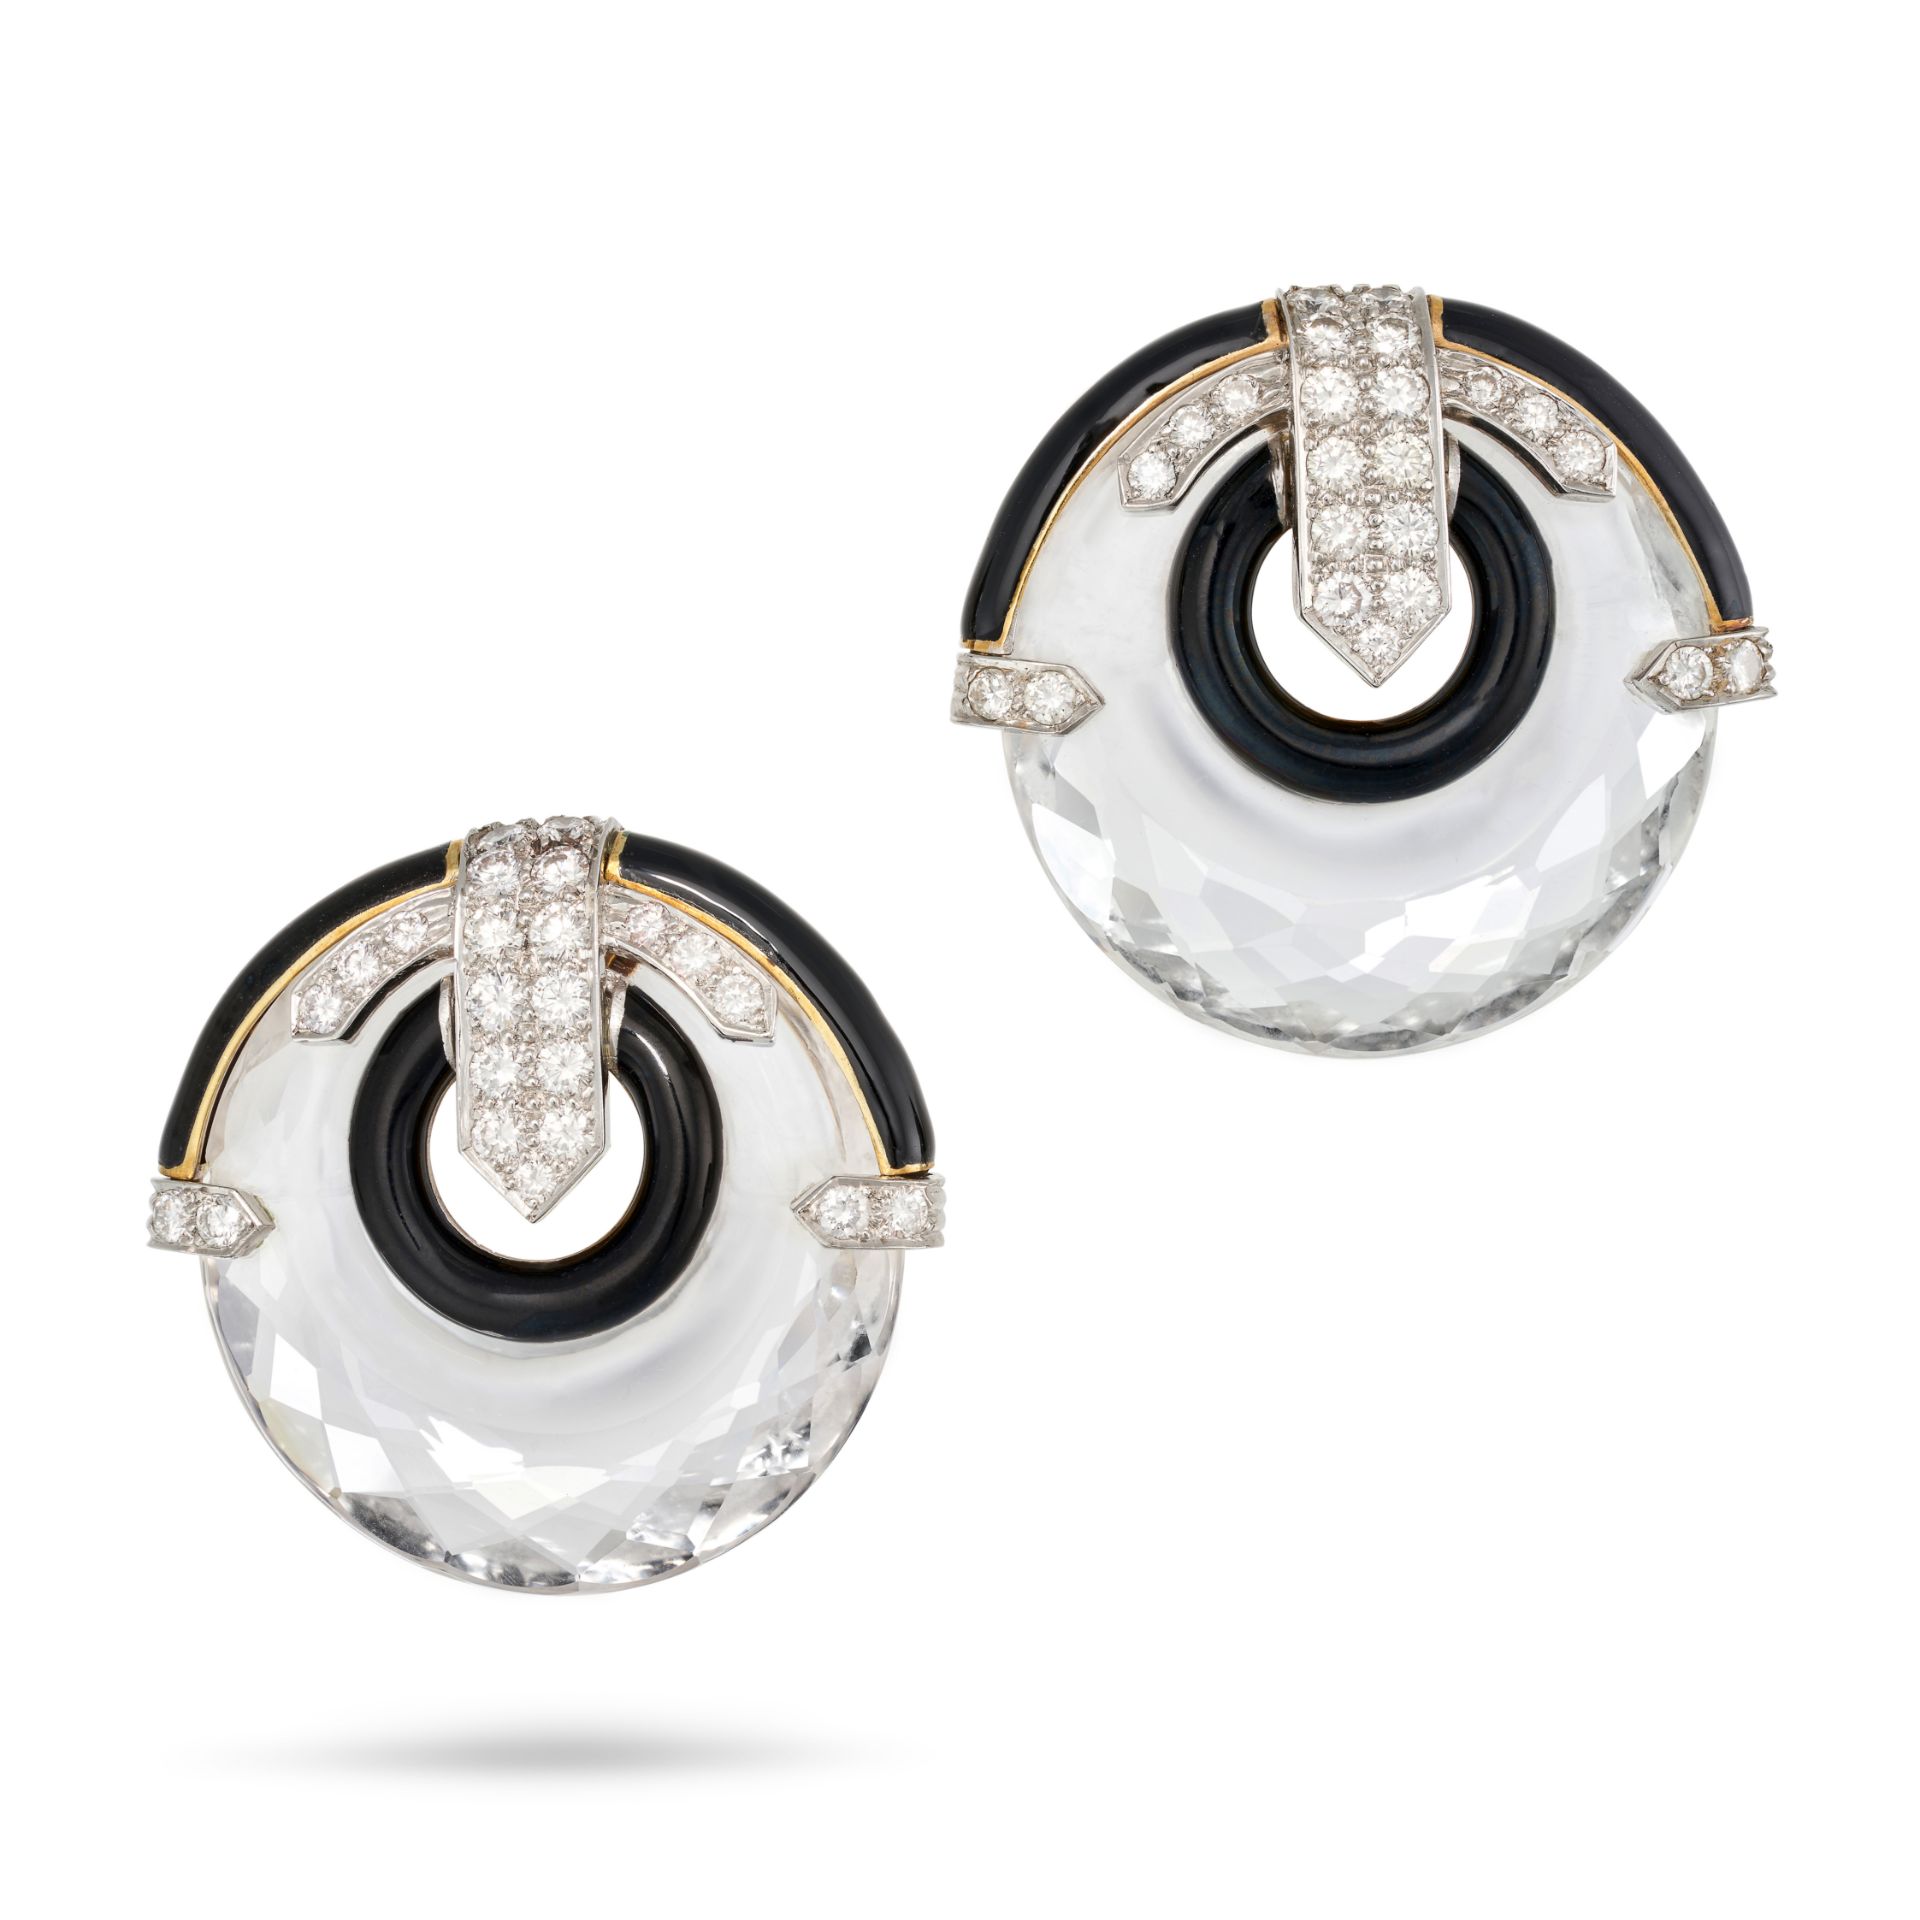 DAVID WEBB, A PAIR OF ROCK CRYSTAL, DIAMOND AND ONYX LIGHT BEAM EARRINGS in 18ct yellow gold and ...